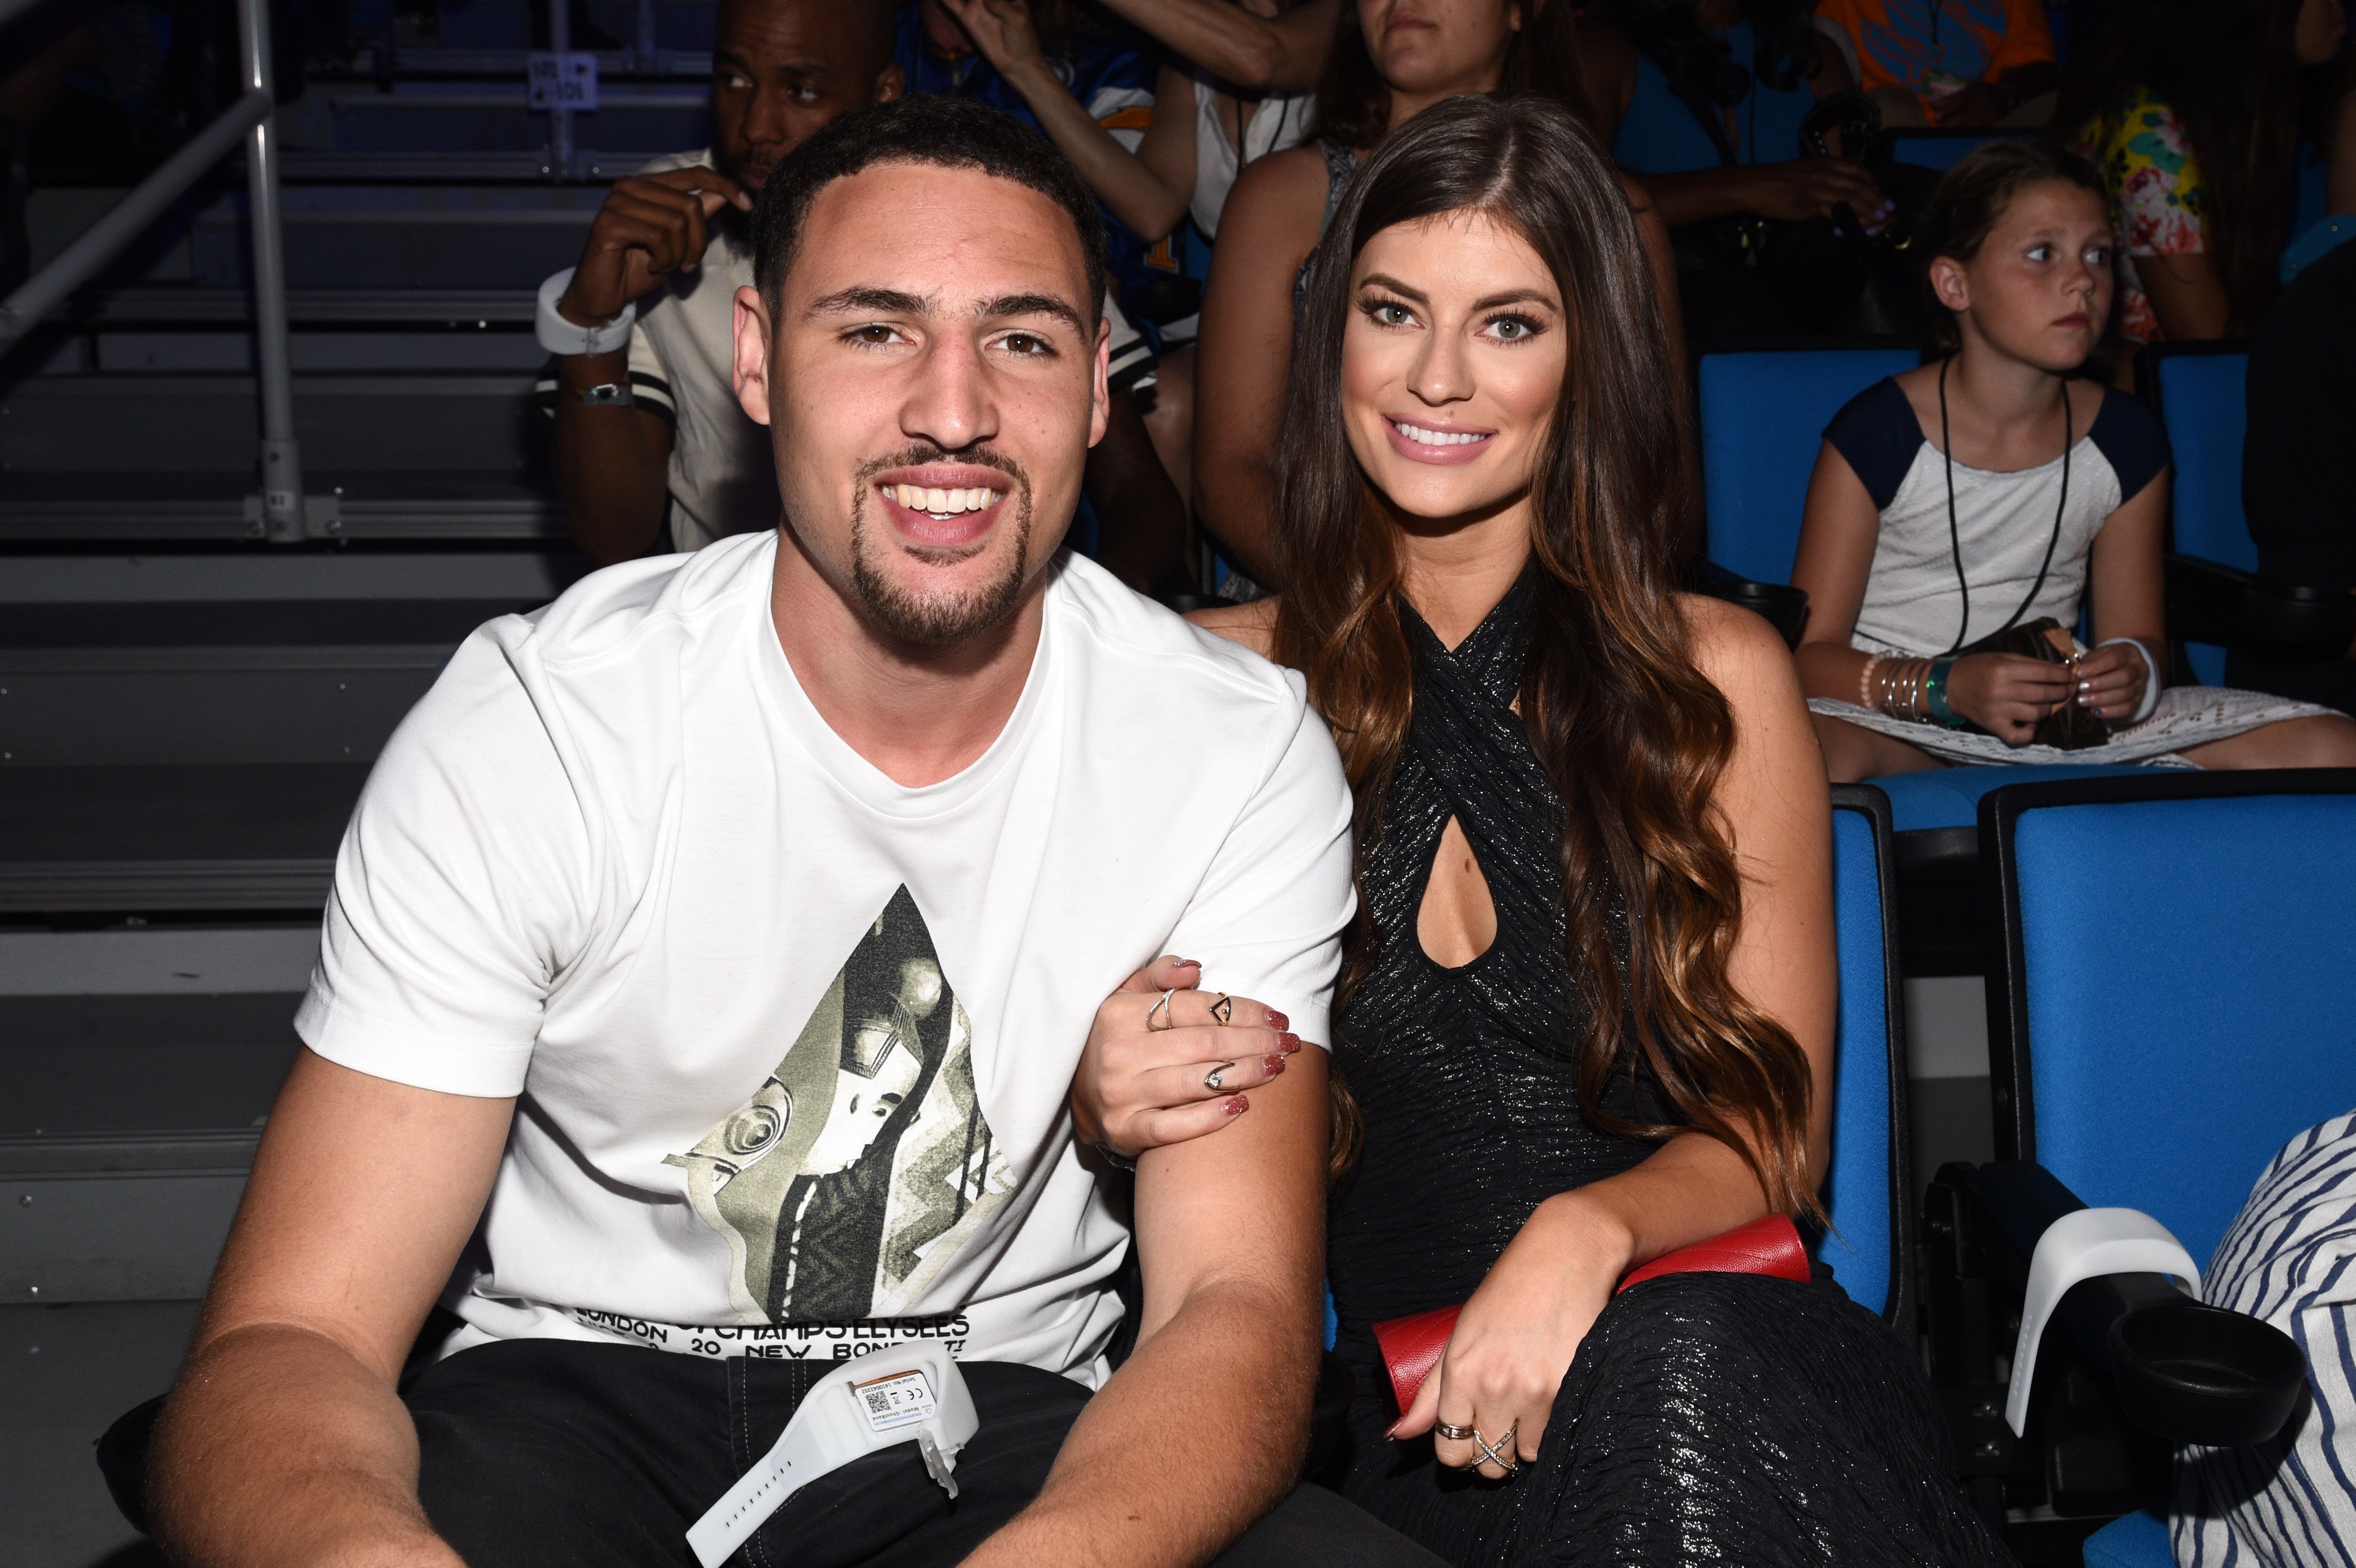 Klay Thompson and Hannah Stocking at the Nickelodeon Kids' Choice Sports Awards 2015 at UCLA's Pauley Pavilion in Westwood, California on July 16, 2015 | Source: Getty Images